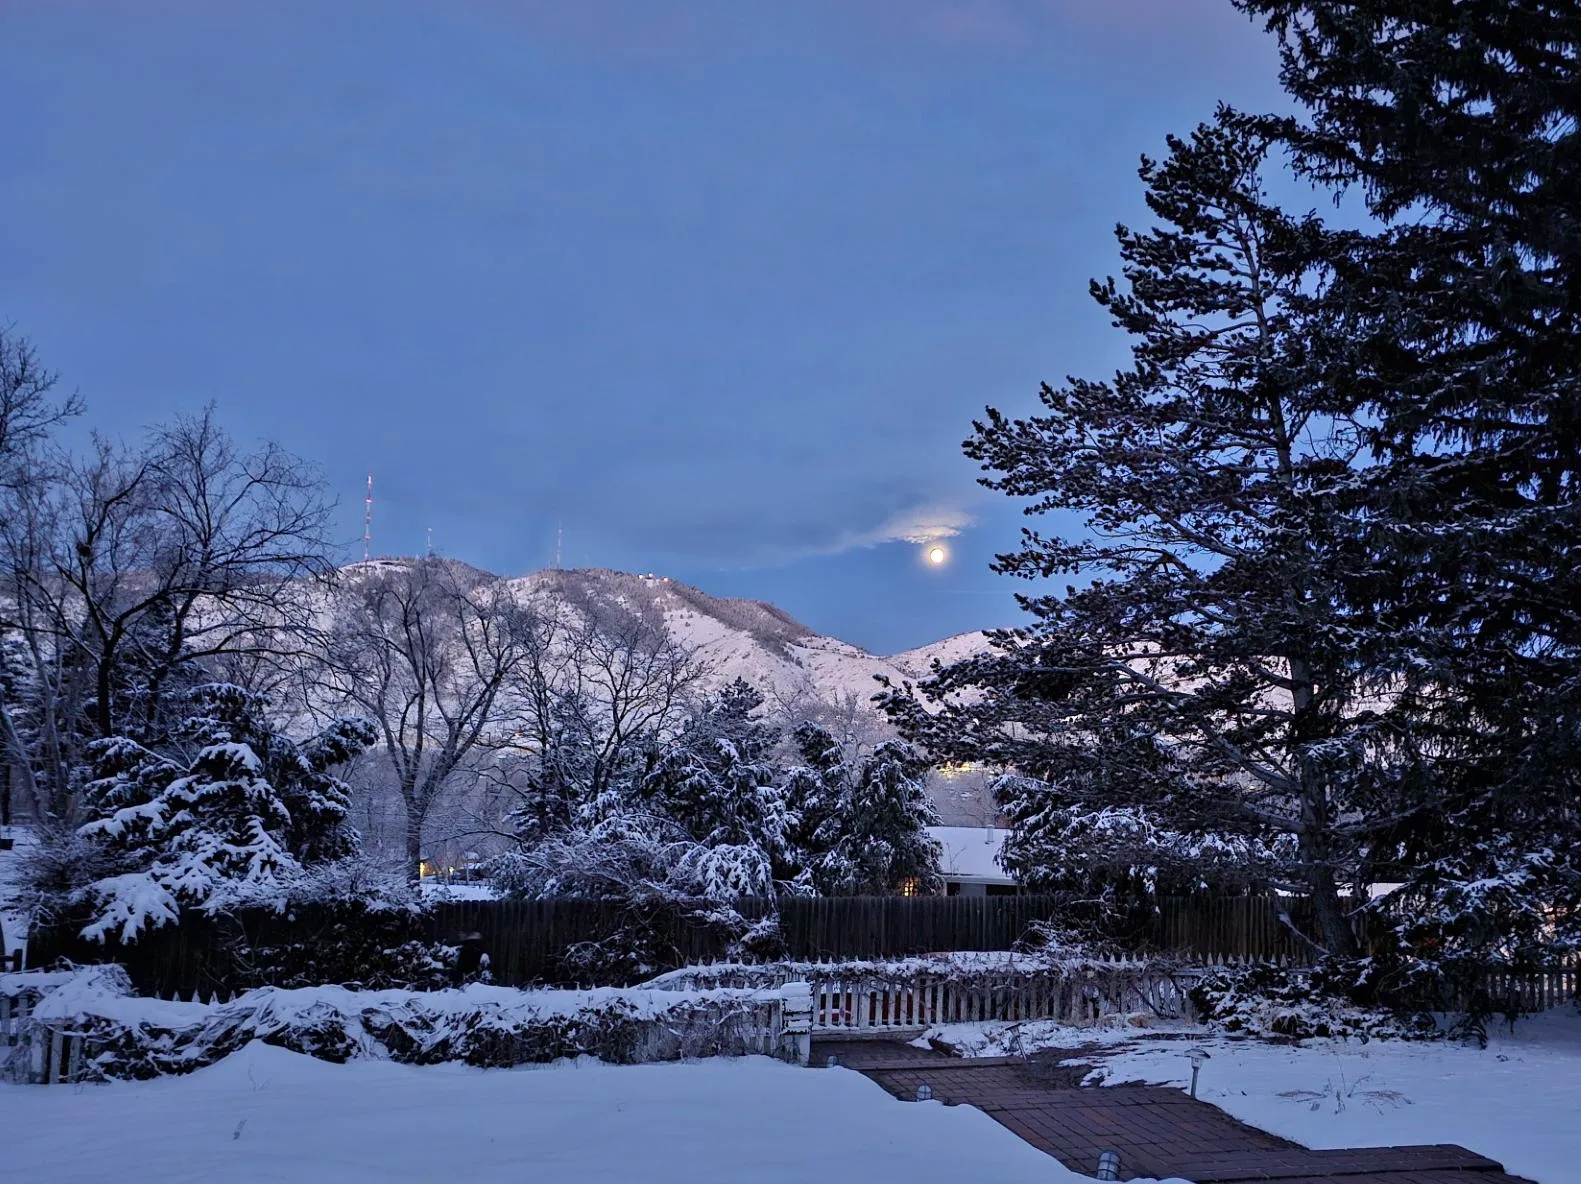 Full moon setting behind snow-covered foothills.  Brick sidewalk and large evergreens in foreground.